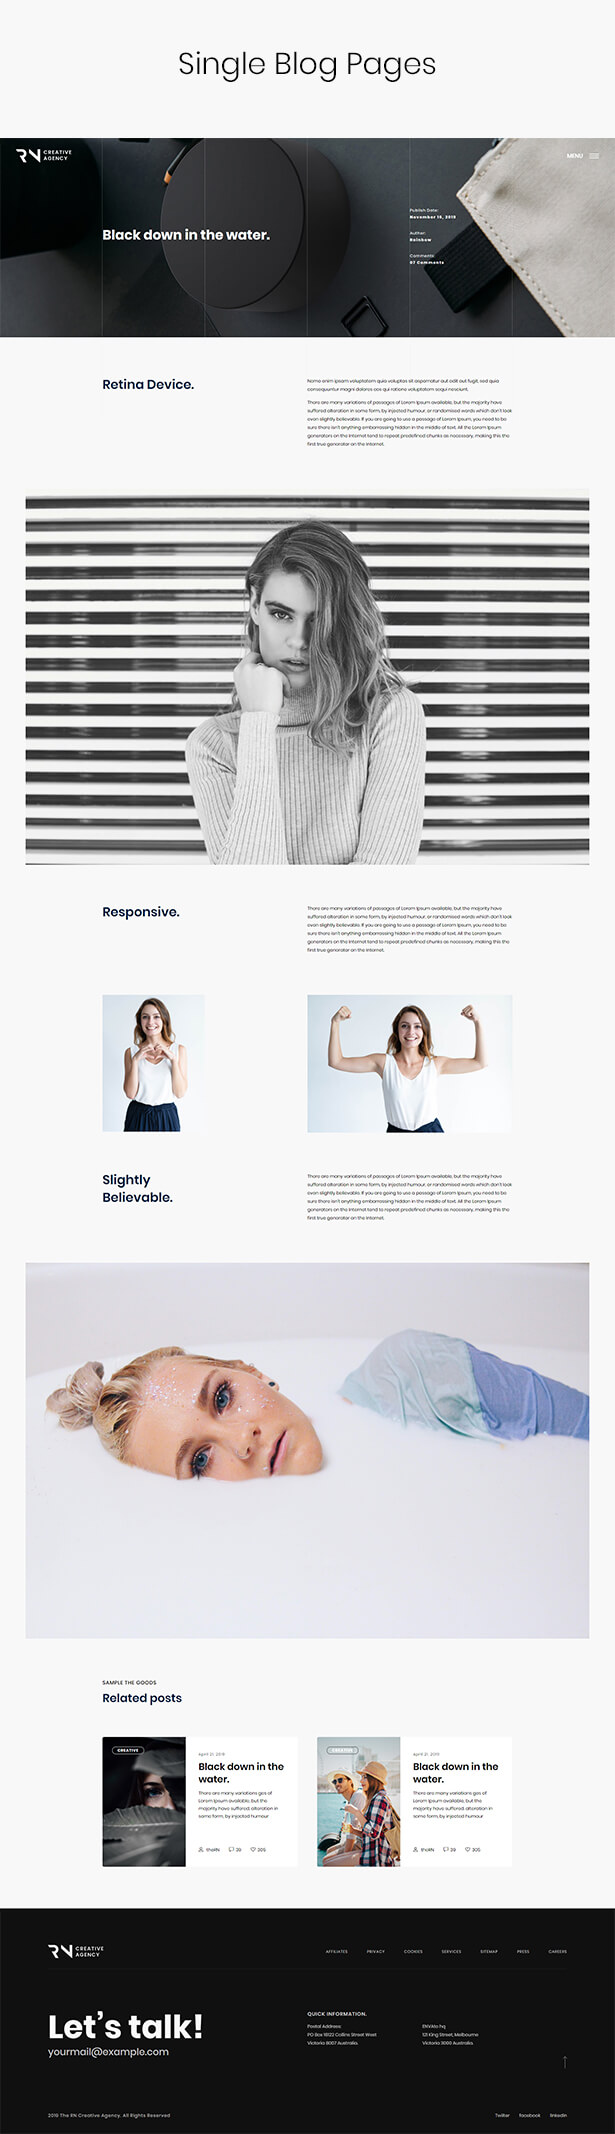 TheRN - Gatsby Creative Agency & Blog Template - 9